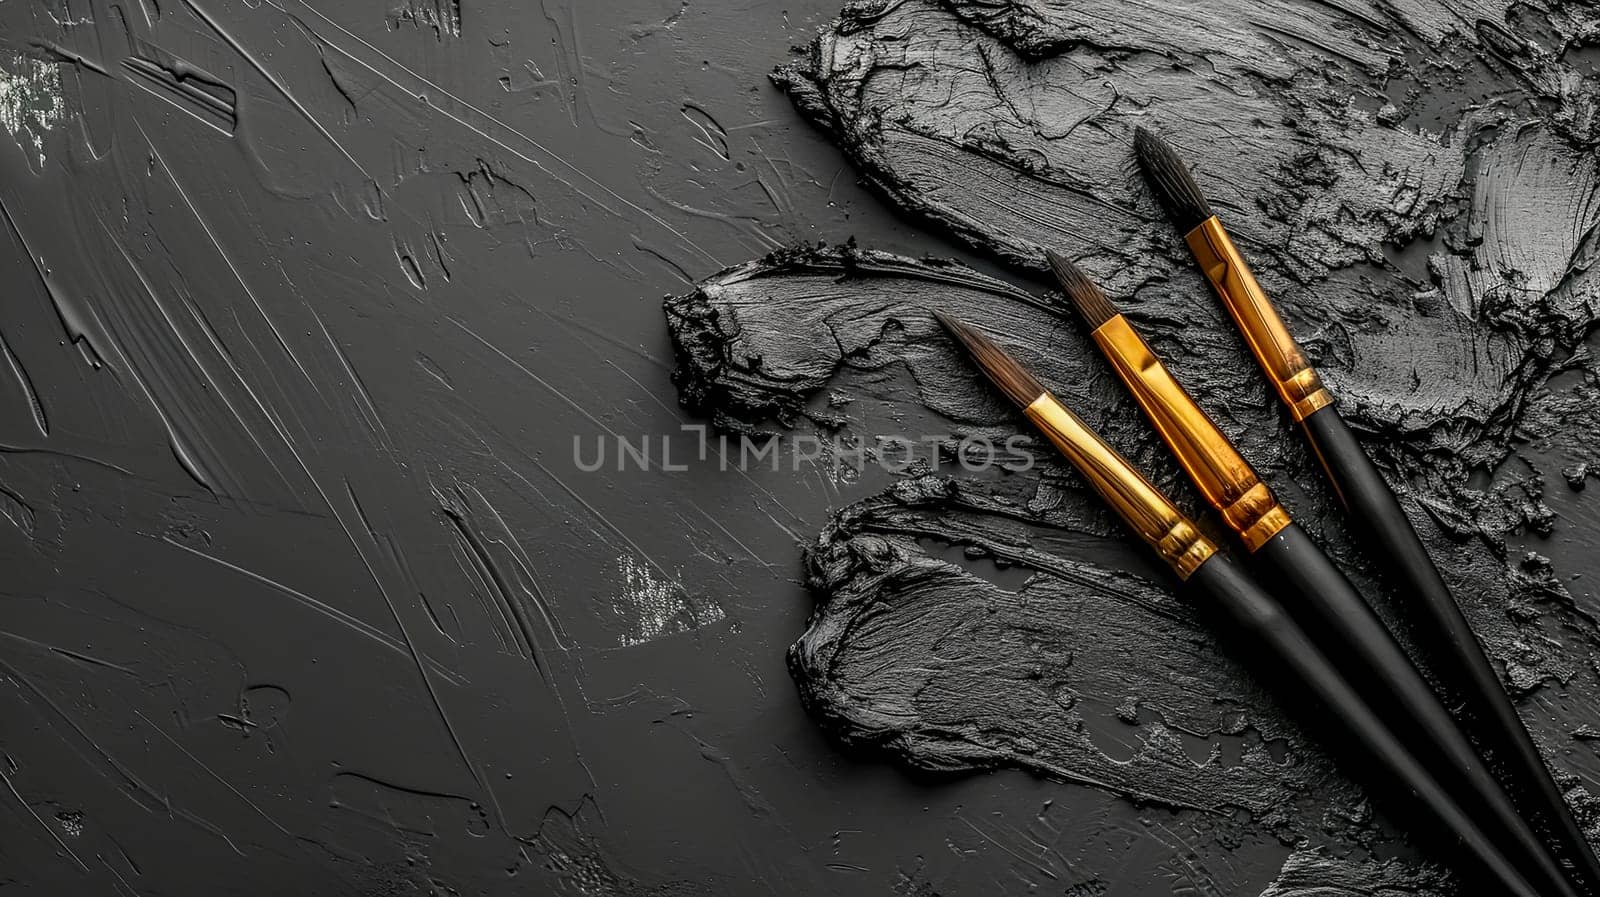 three paintbrushes with golden ferrules resting on a textured charcoal black painted surface, portraying the essence of the creative process in art and painting.